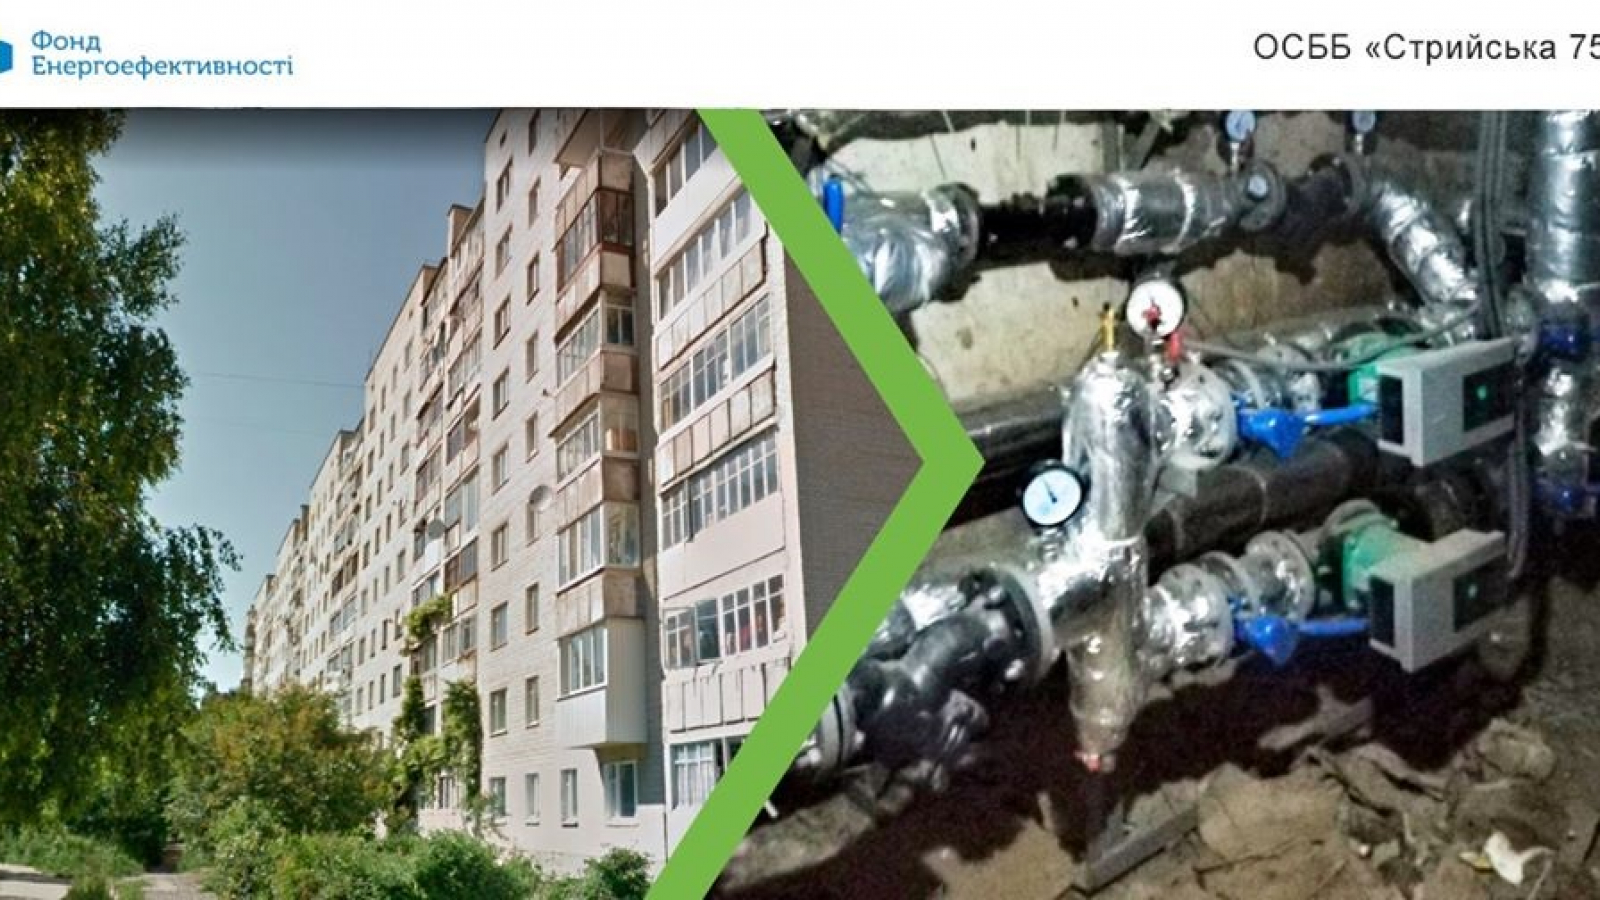 Ukraine: EU and Energy Efficiency Fund make two more high-rise apartment buildings energy efficient